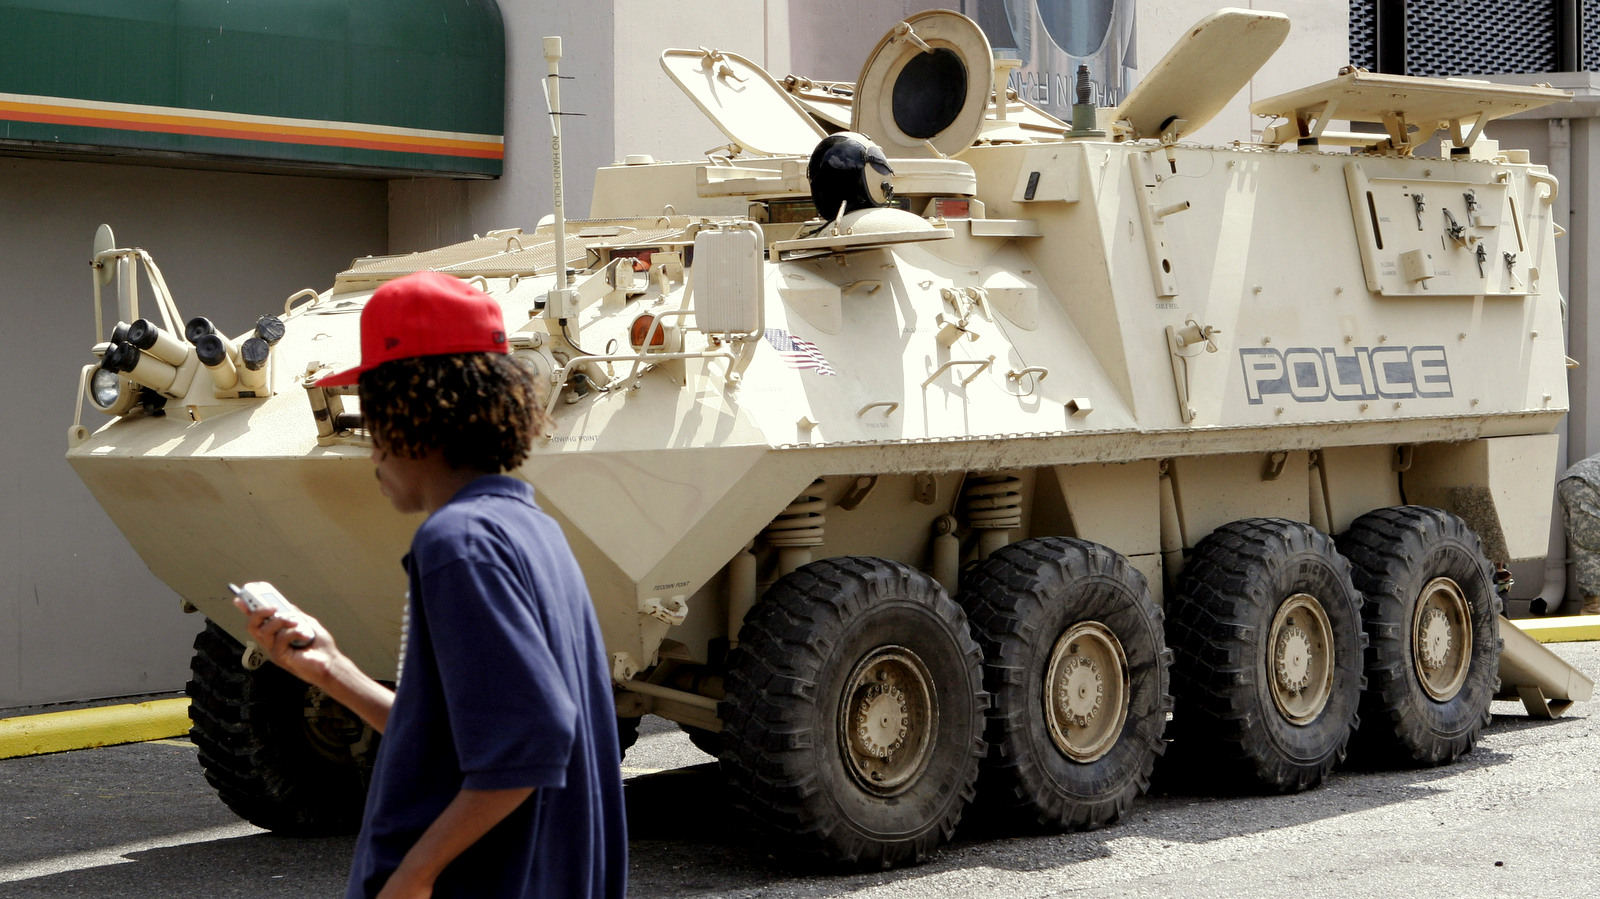 An armored vehicle used by state and local authorities for drug enforcement is brought into the city for school kids to tour in New Orleans/ (AP Photo/Alex Brandon)